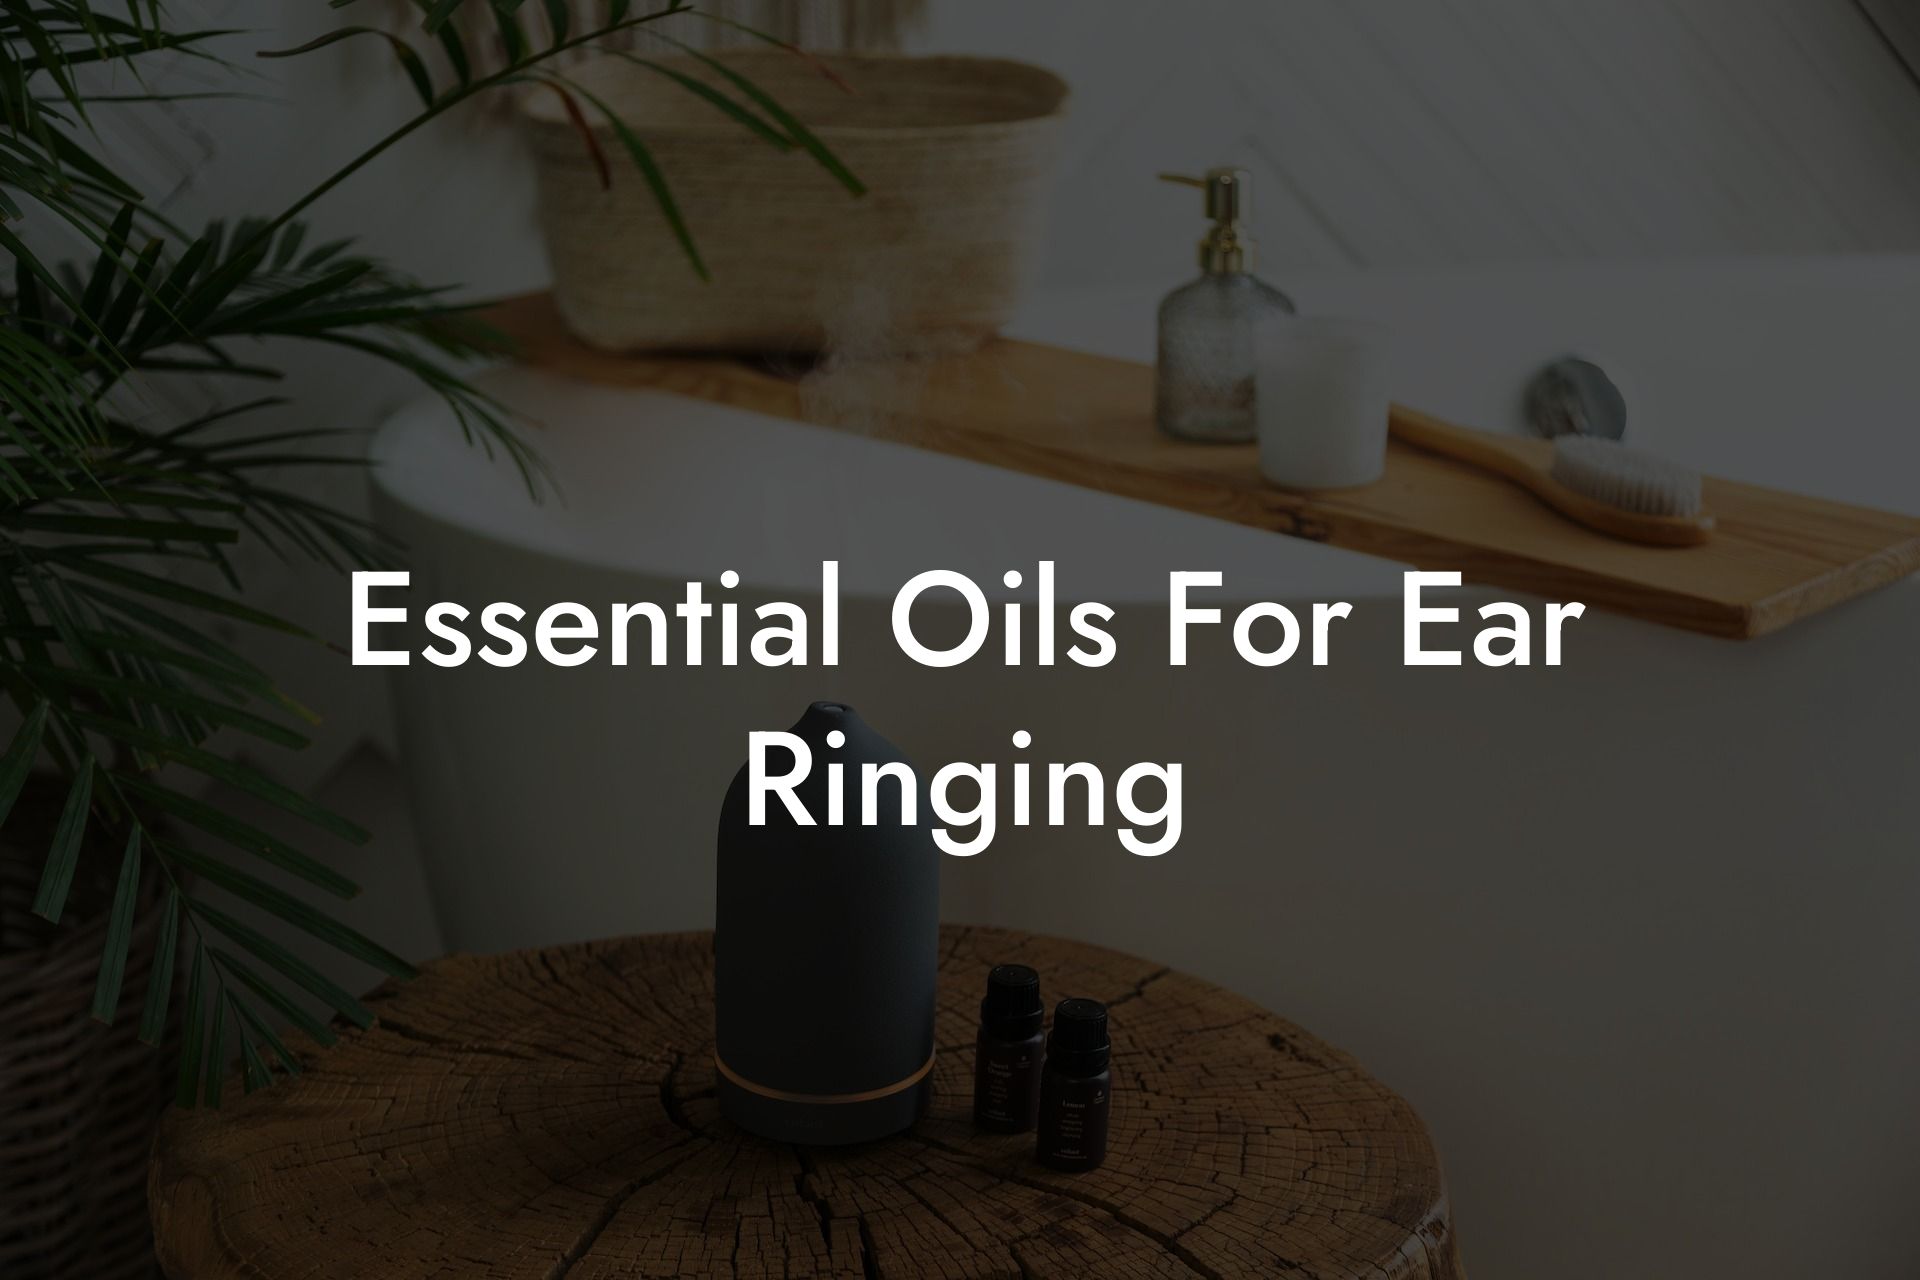 Essential Oils For Ear Ringing